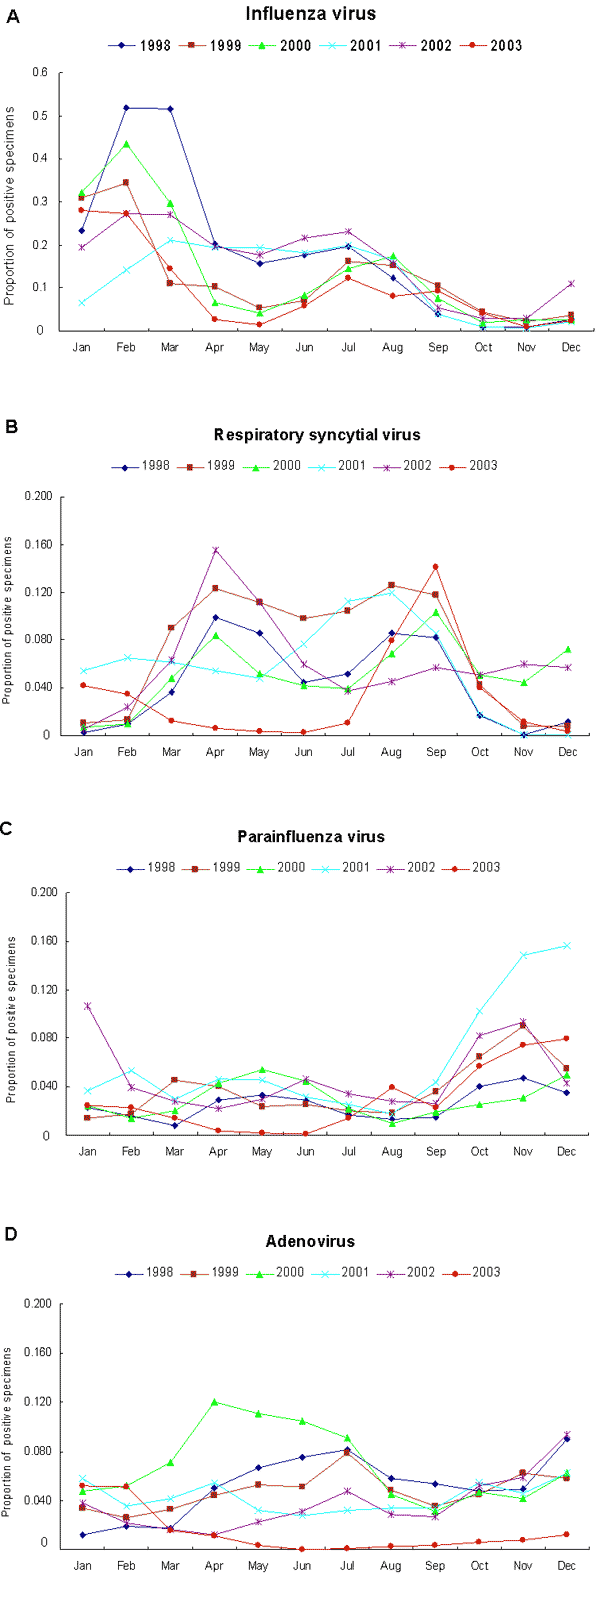 Proportion of positive specimens by month, 1998–2003, for A) influenza virus, B) respiratory syncytial virus, C) parainfluenza virus, and D) adenovirus.